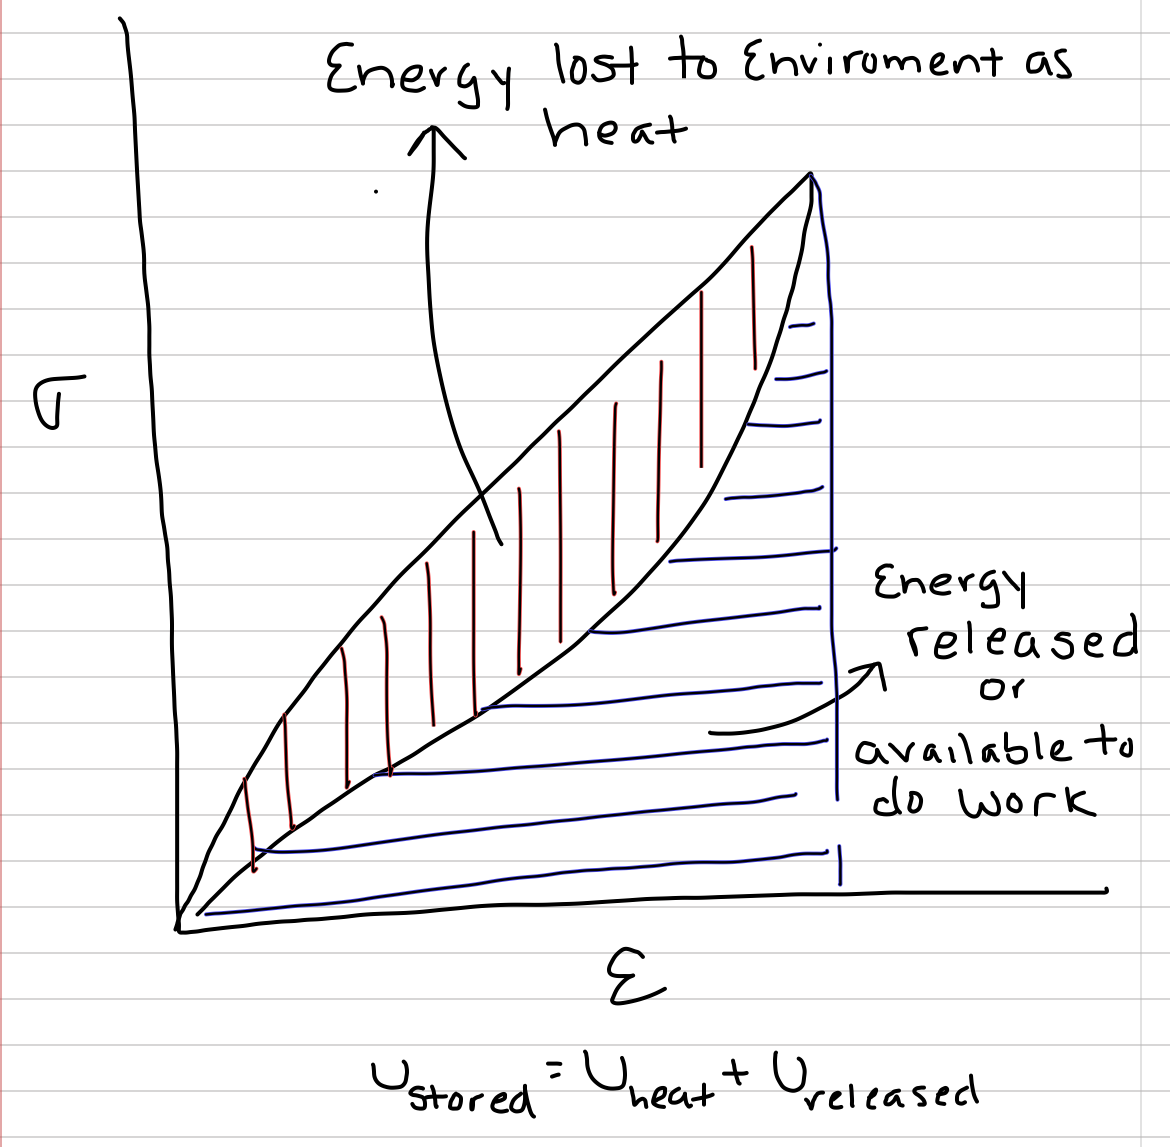 The total area under the loading curve is the stored elastic strain energy density. The area under the unloading curve is the fraction of stored elastic strain energy density that is returned, or available to do work. The area between the two curves is the fraction of stored elastic strain energy density that is lost to the environment as heat